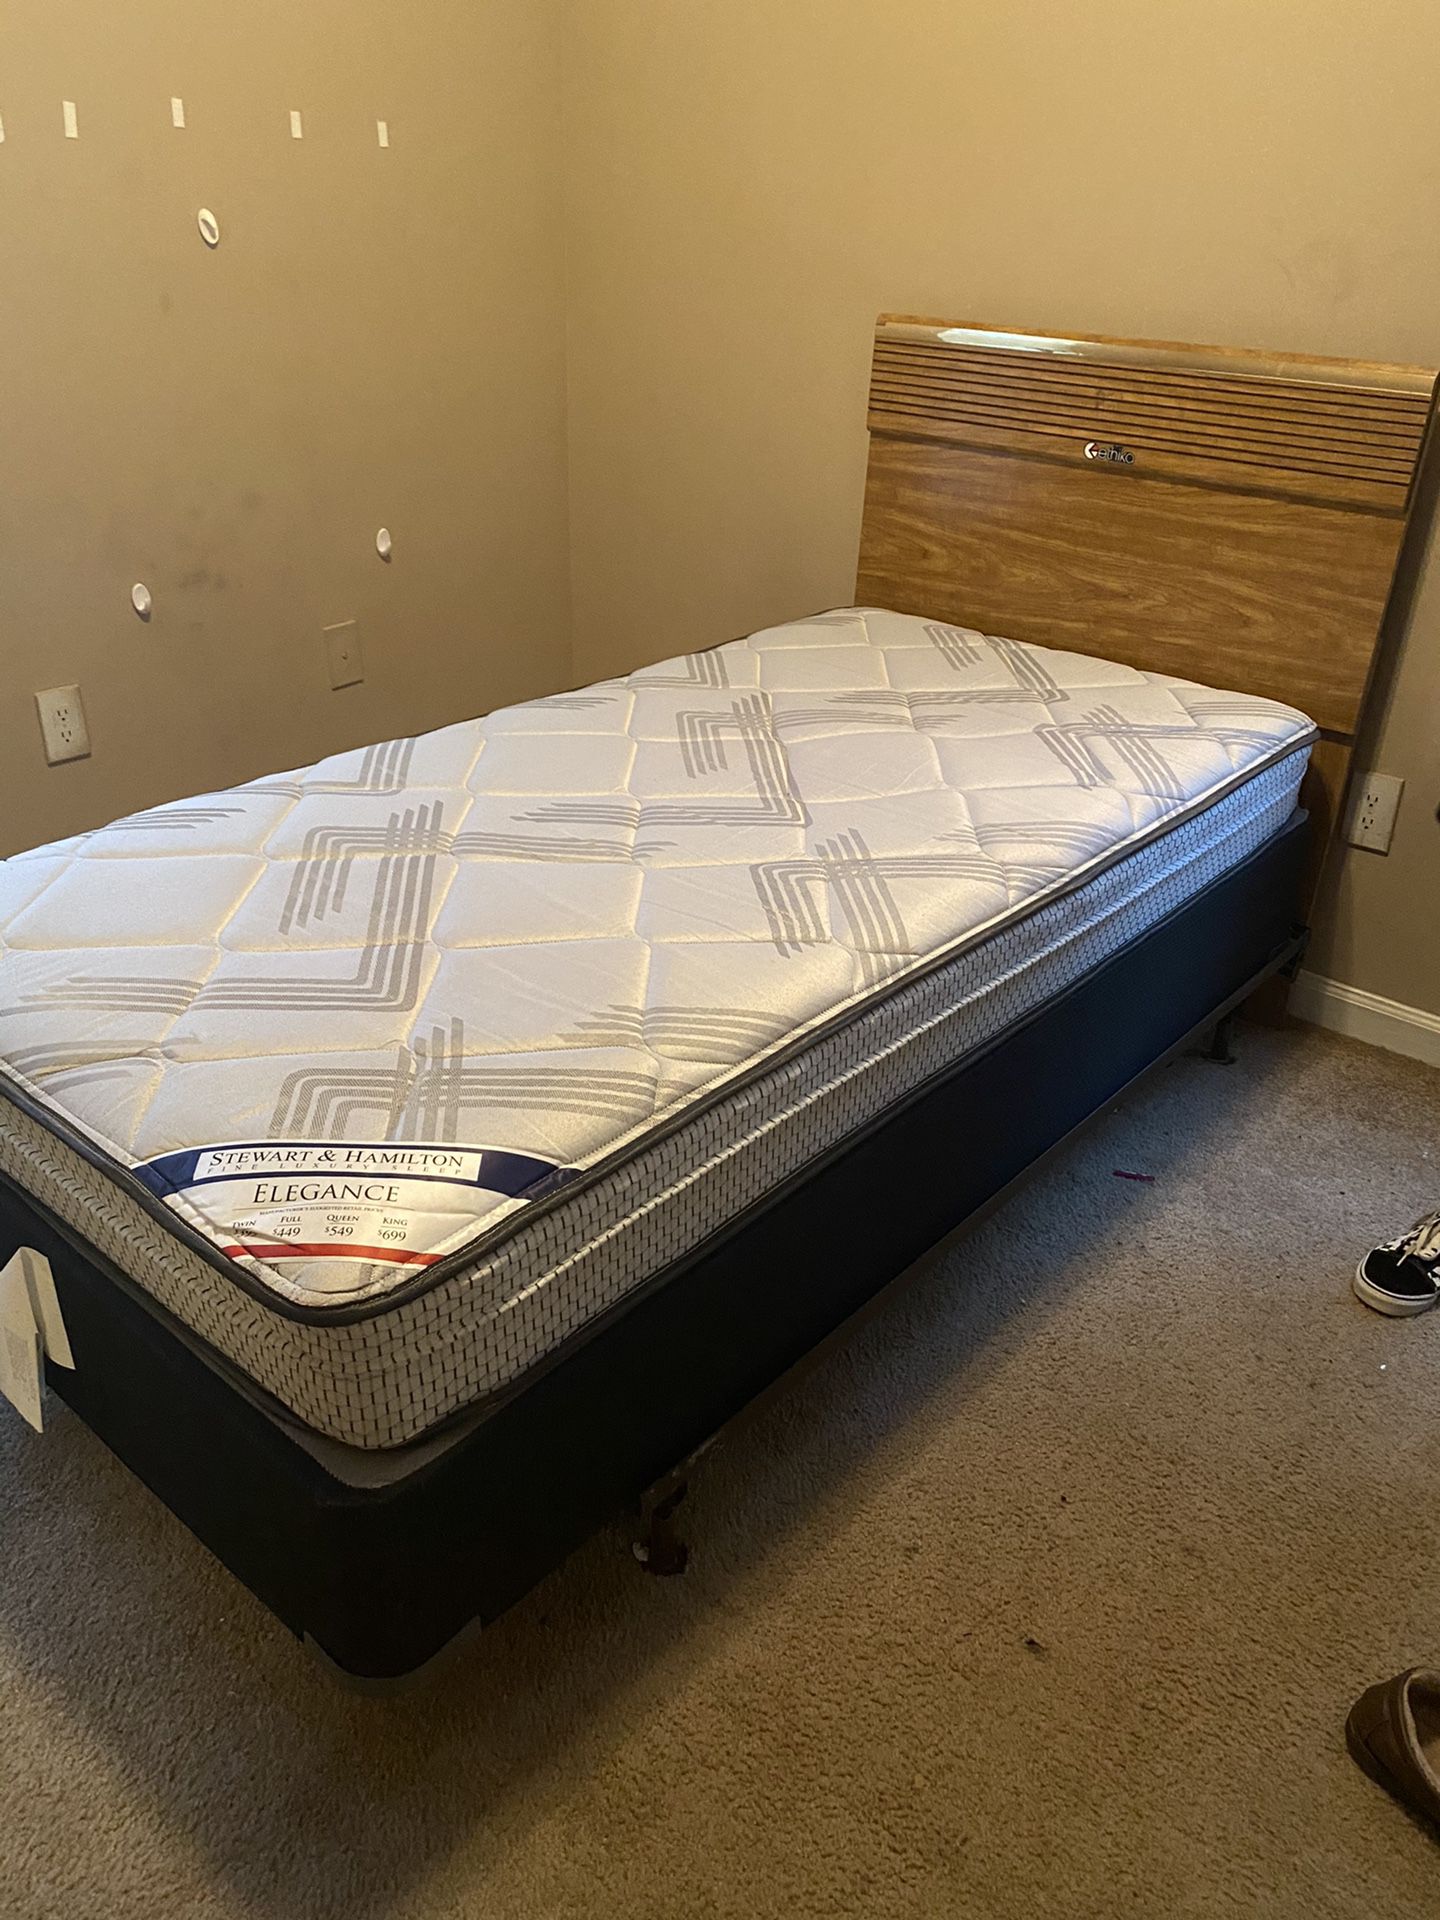 Twin bed for SALE! $350 comes with headboard and mattress and box spring.